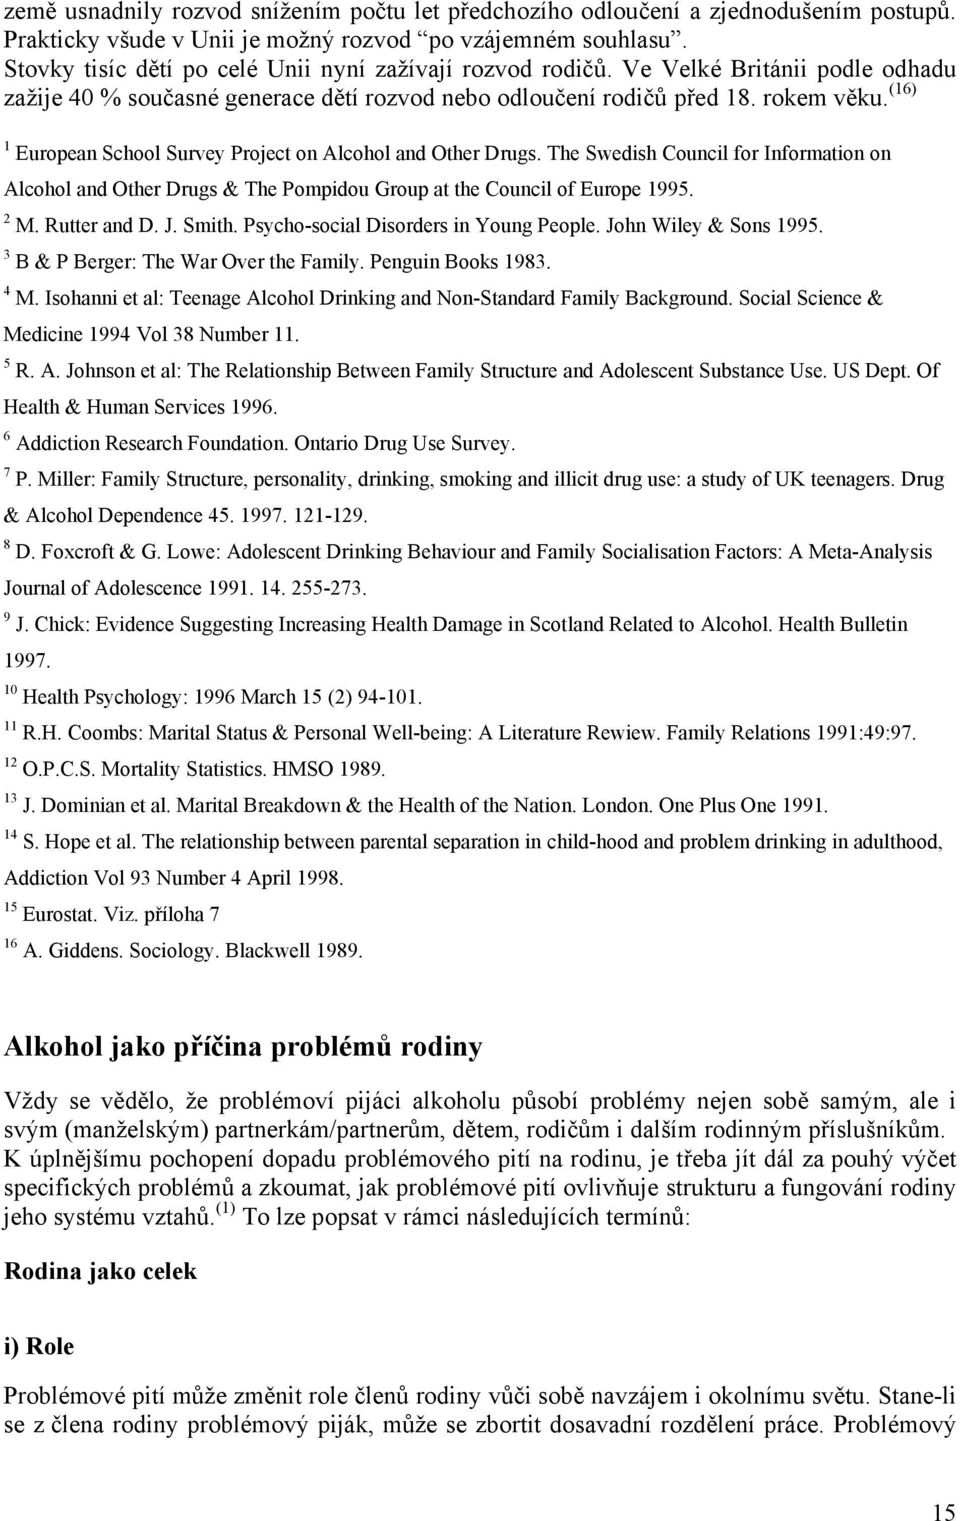 (16) 1 European School Survey Project on Alcohol and Other Drugs. The Swedish Council for Information on Alcohol and Other Drugs & The Pompidou Group at the Council of Europe 1995. 2 M. Rutter and D.